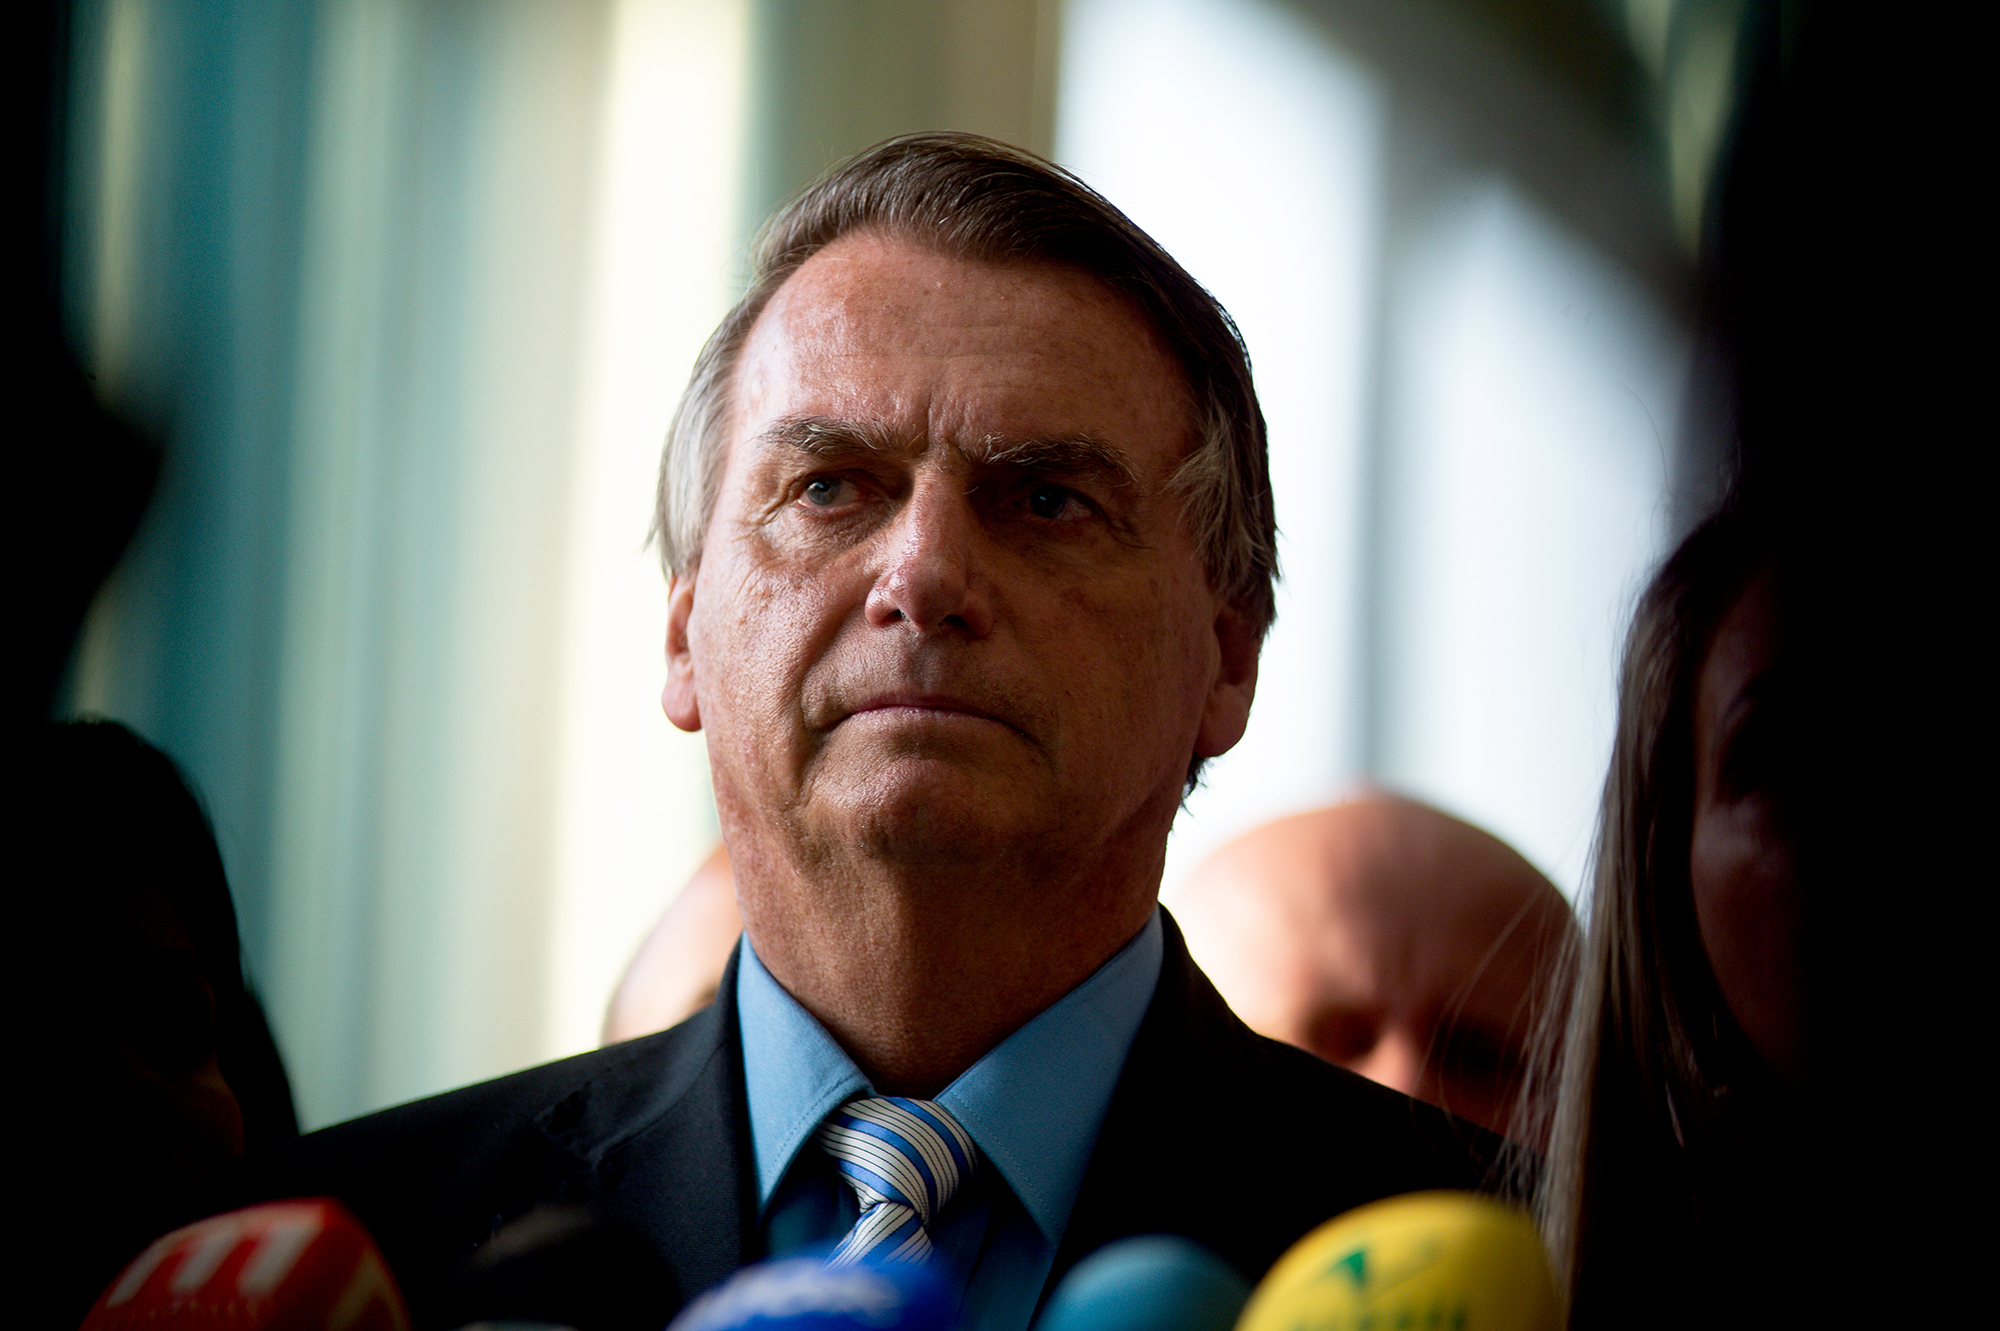 Jair Bolsonaro looks on during a news conference after meeting with mayors from across Brazil at Alvorada Palace on October 19 in Brasilia, Brazil.